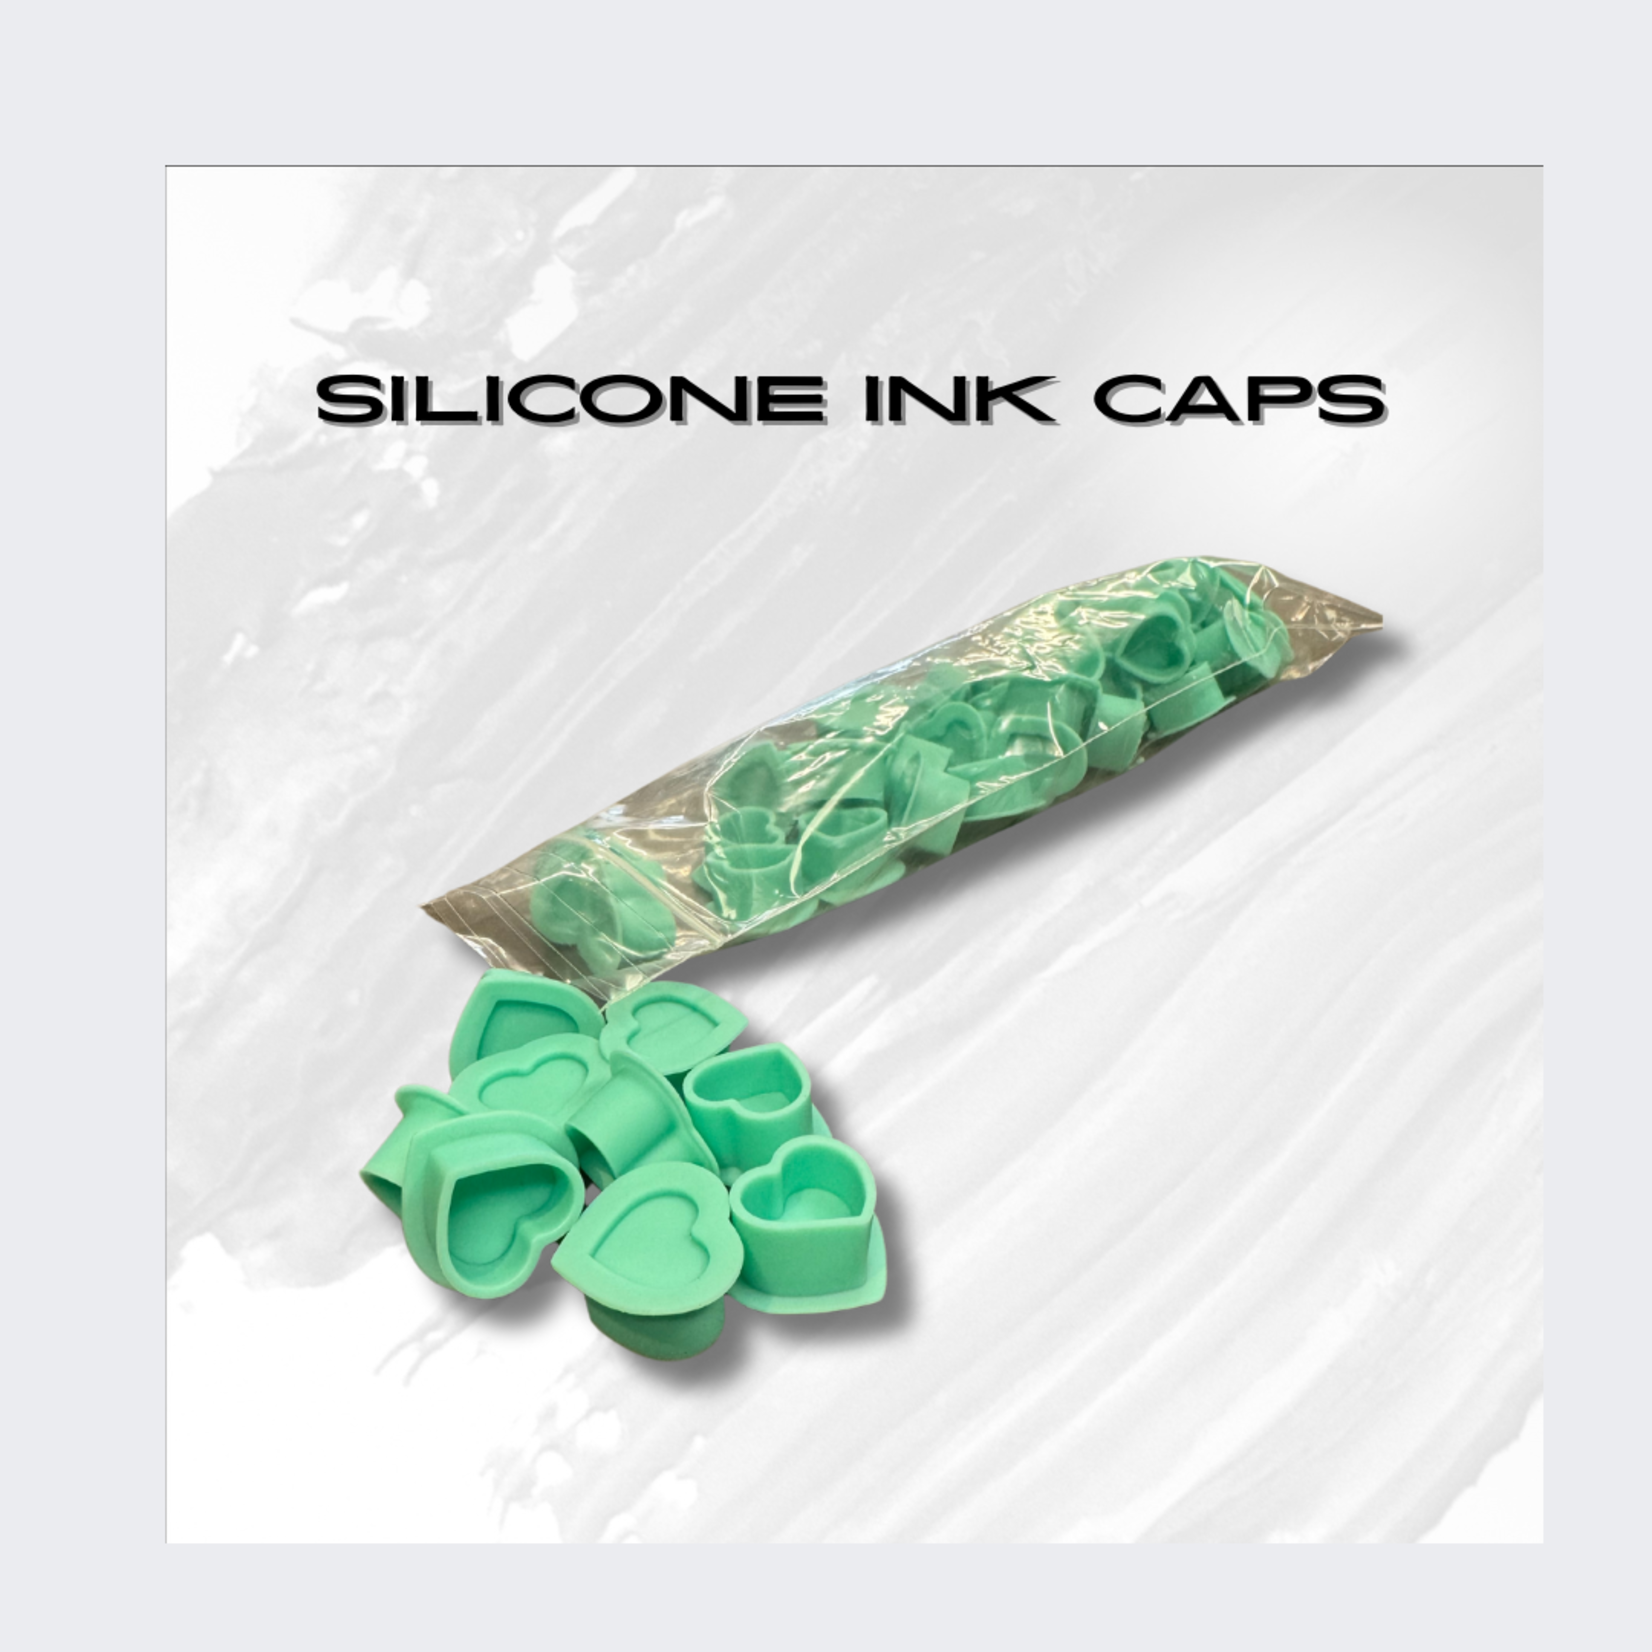 ULTRA SOFT SILICONE HEARTS INK CUPS